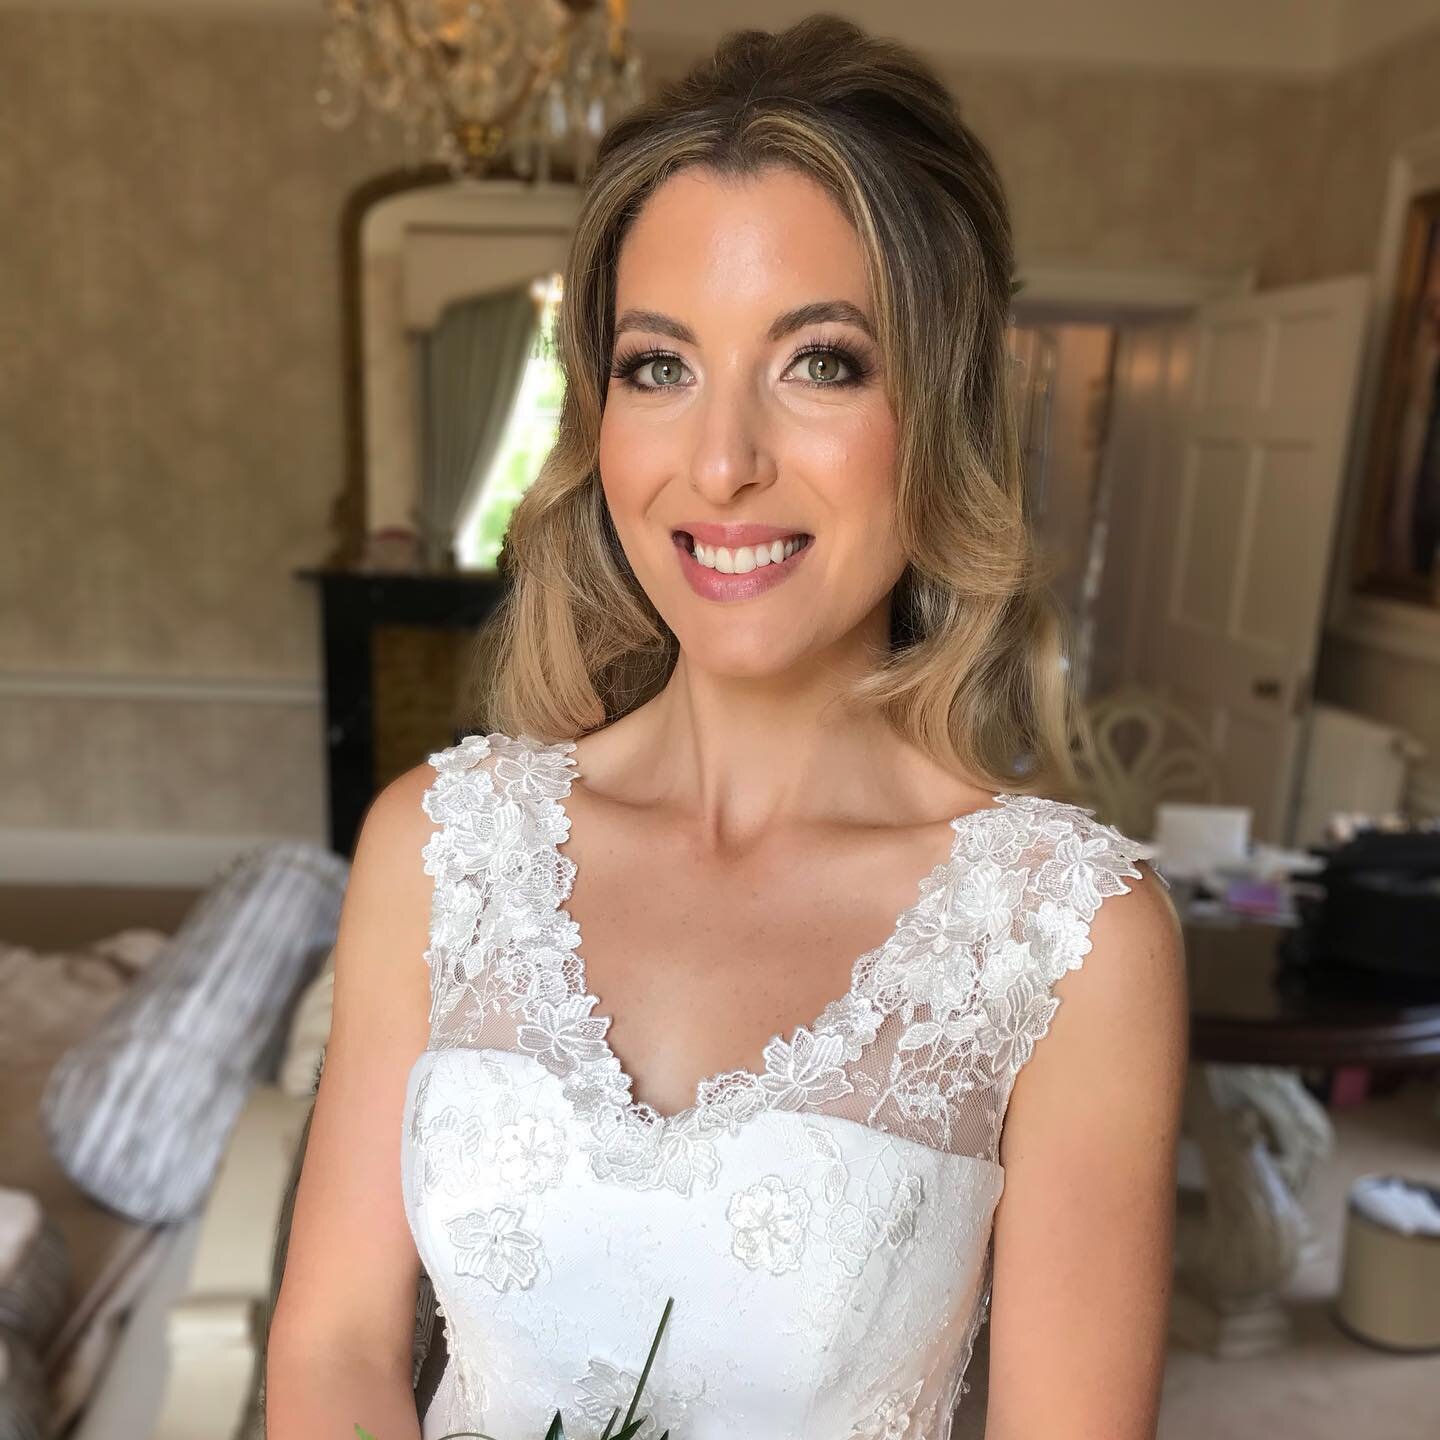 Stunning Aimee 😍 Love a mid week wedding 💒 👰 Always so much fun when I get to do both hair and makeup 🤗
Today I only did Amiee (bride) and her mother as it was a small wedding. I normally recommend to my brides that I stick to either hair OR make